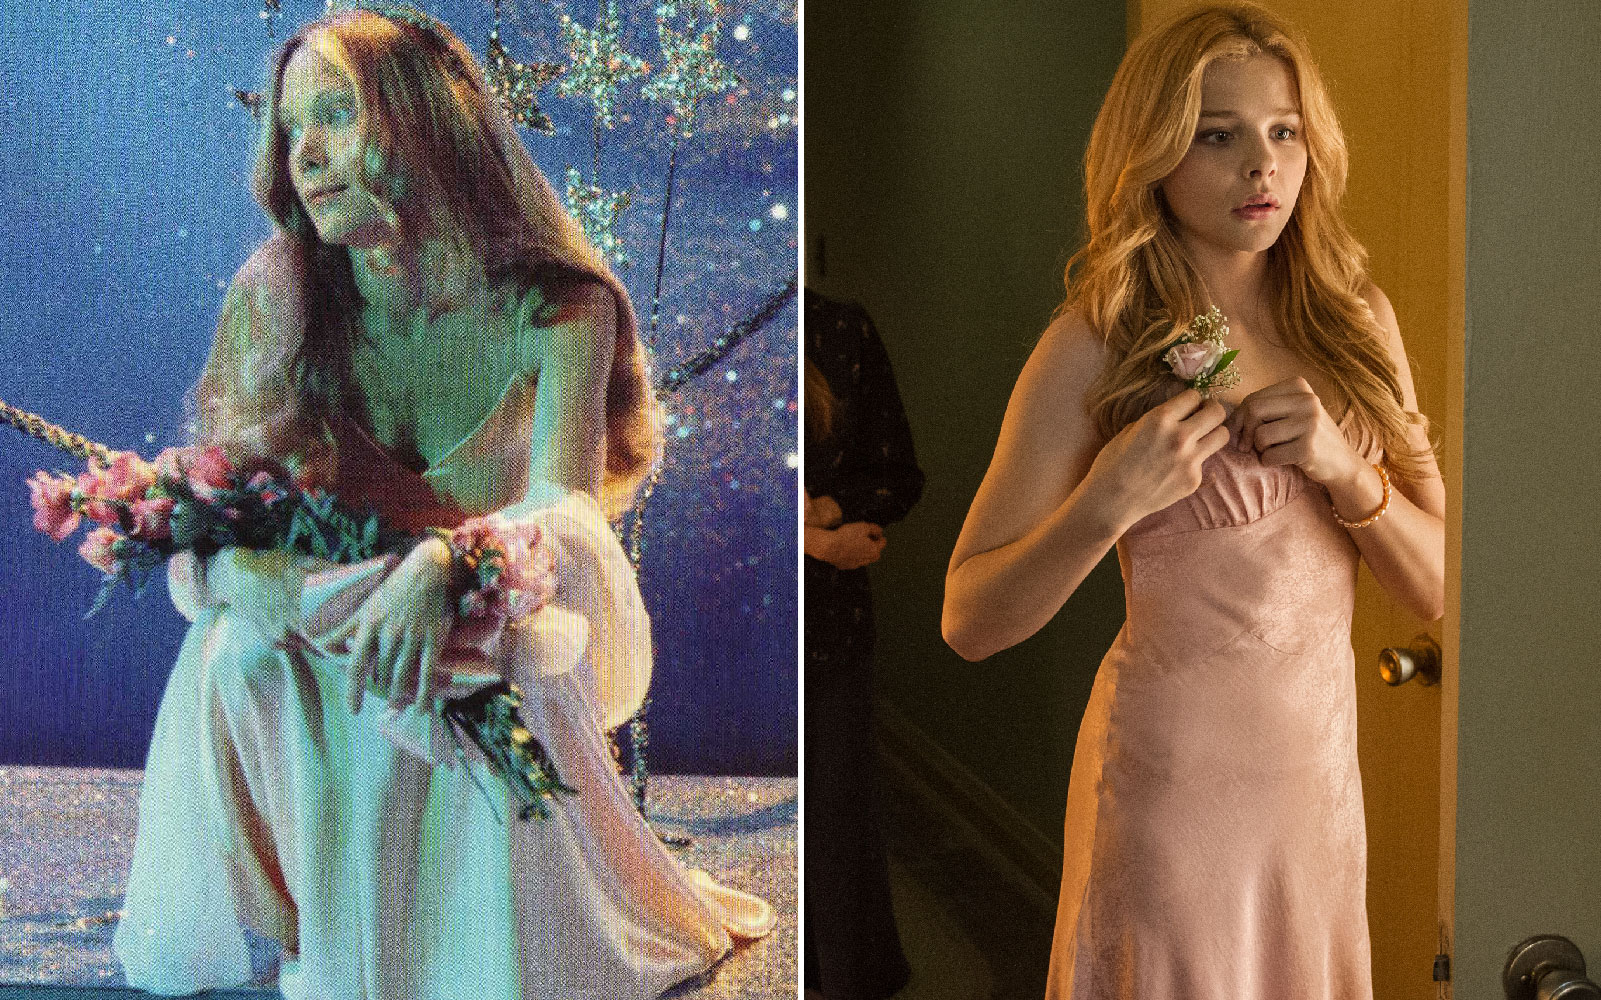 Characteristics of Carrie White from the 1976 version of the film were kept...